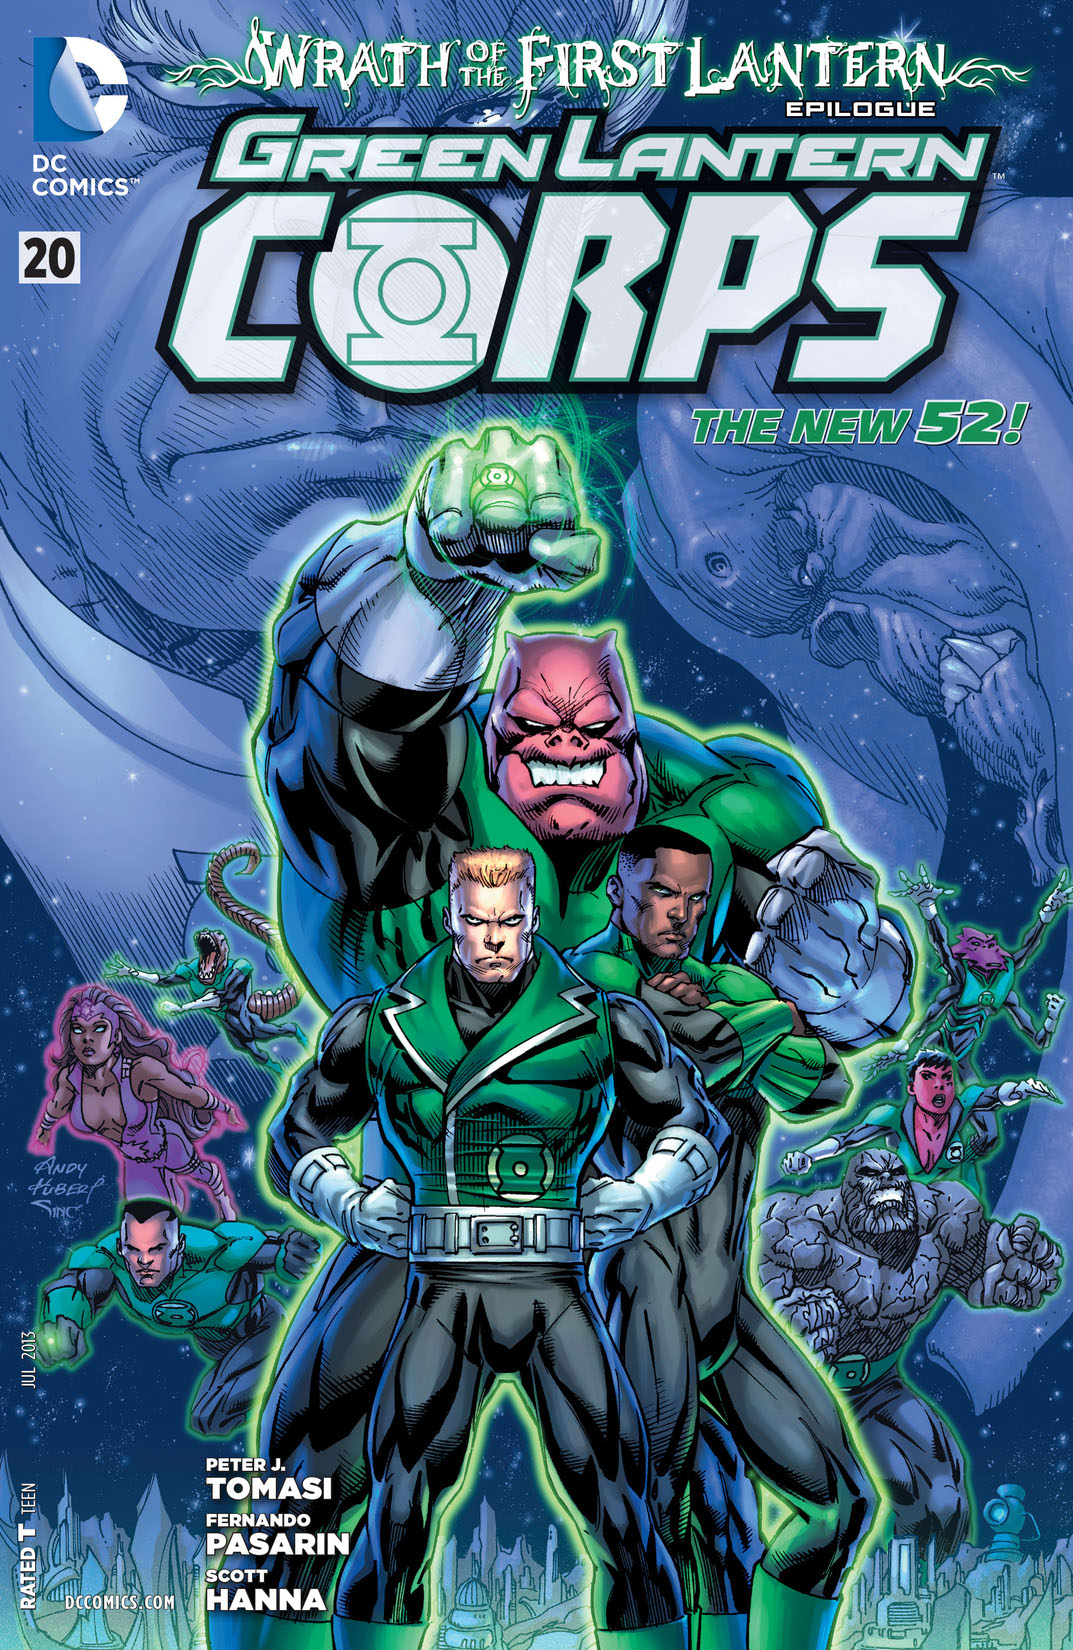 Green Lantern Corps (2011-) #20 preview images